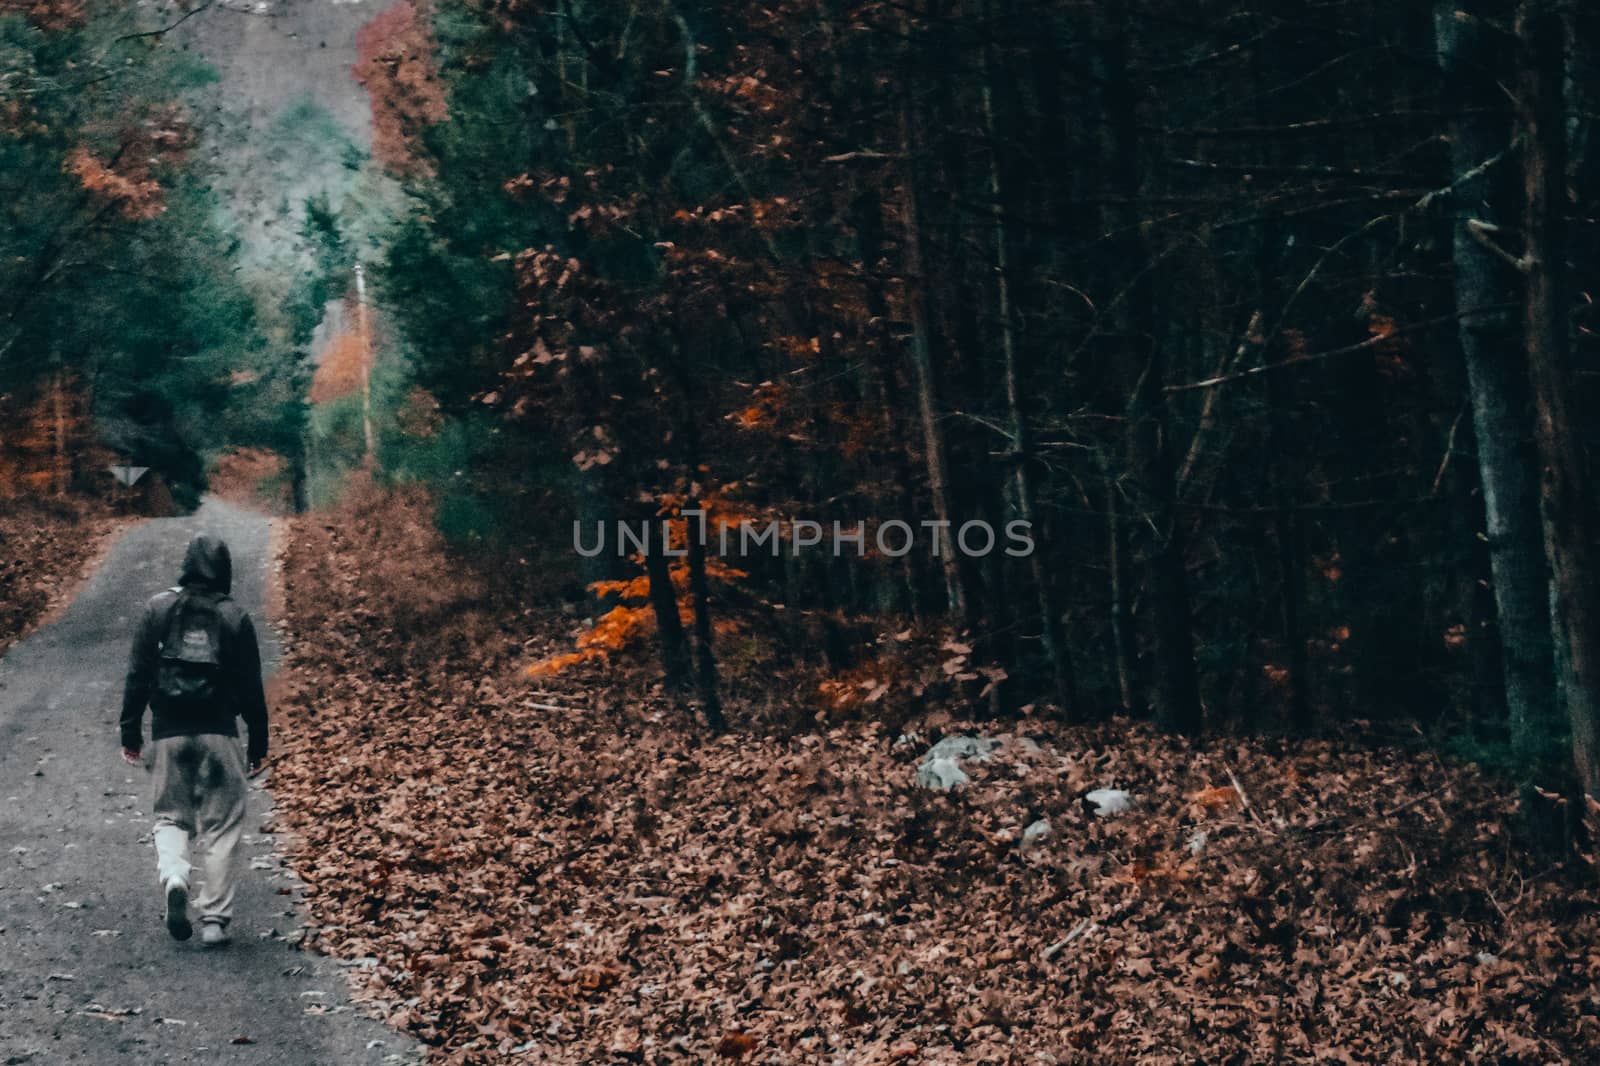 A Man Walking Down a Stone Path in an Autumn Forest by bju12290